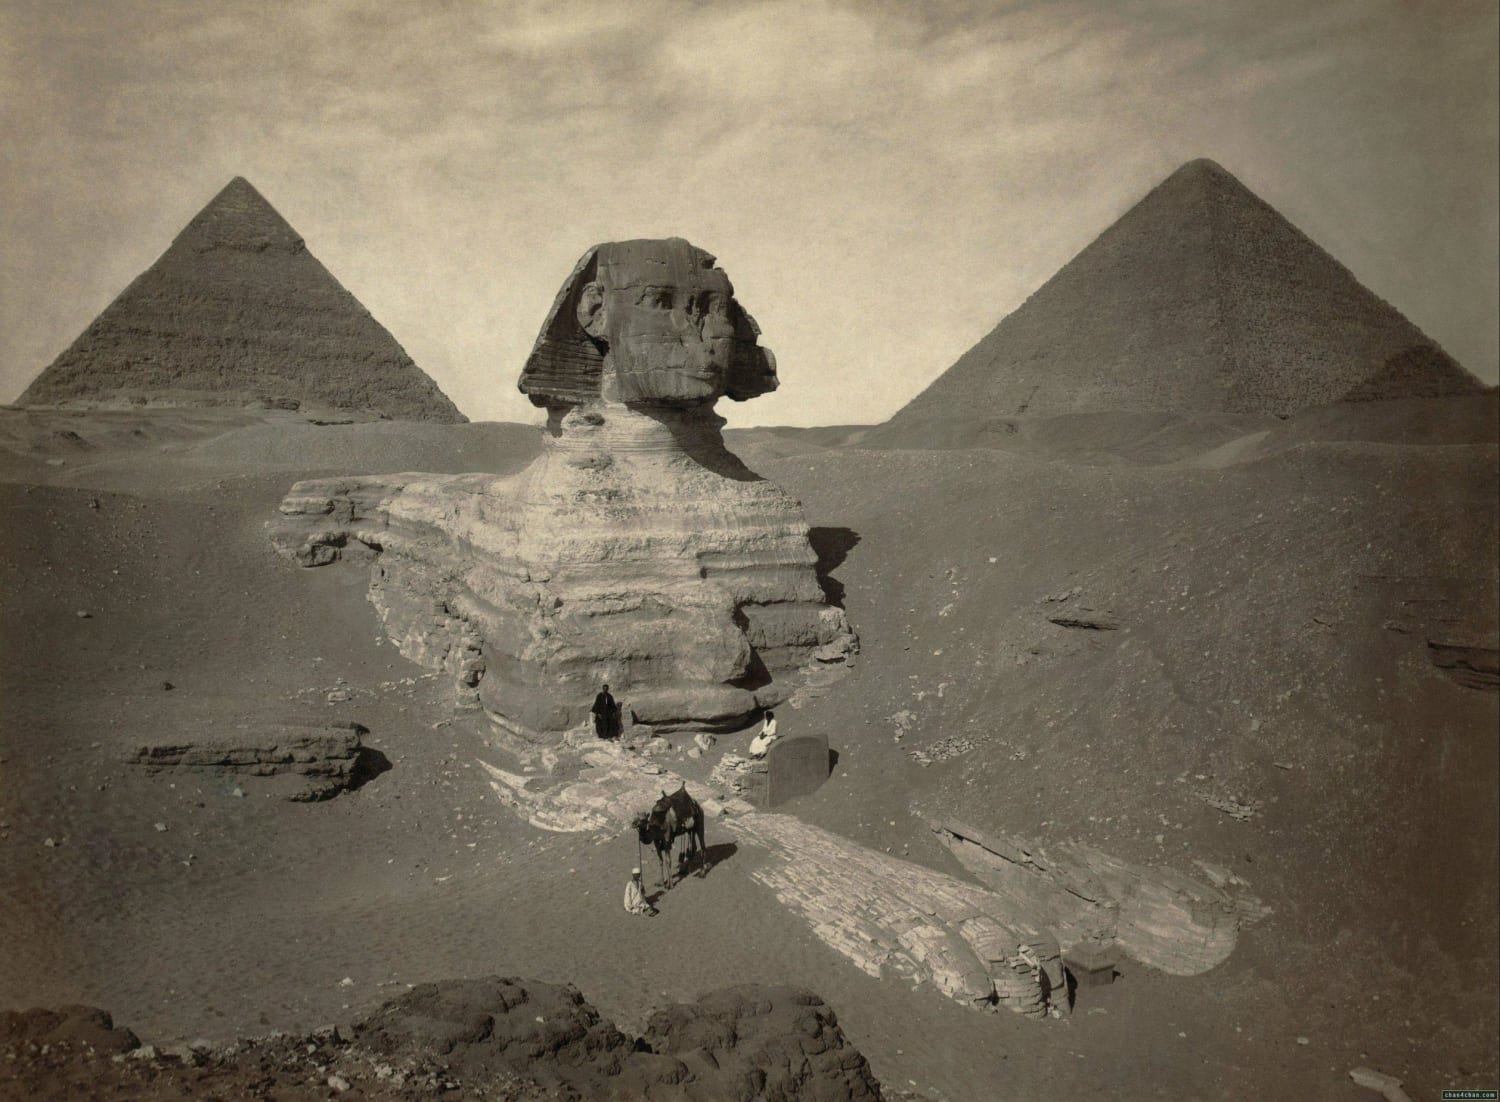 photo of the partially excavated Great Sphinx of Giza, with the Pyramid of Khafre (left) and the Great Pyramid of Giza (right) behind it. taken around 1878.